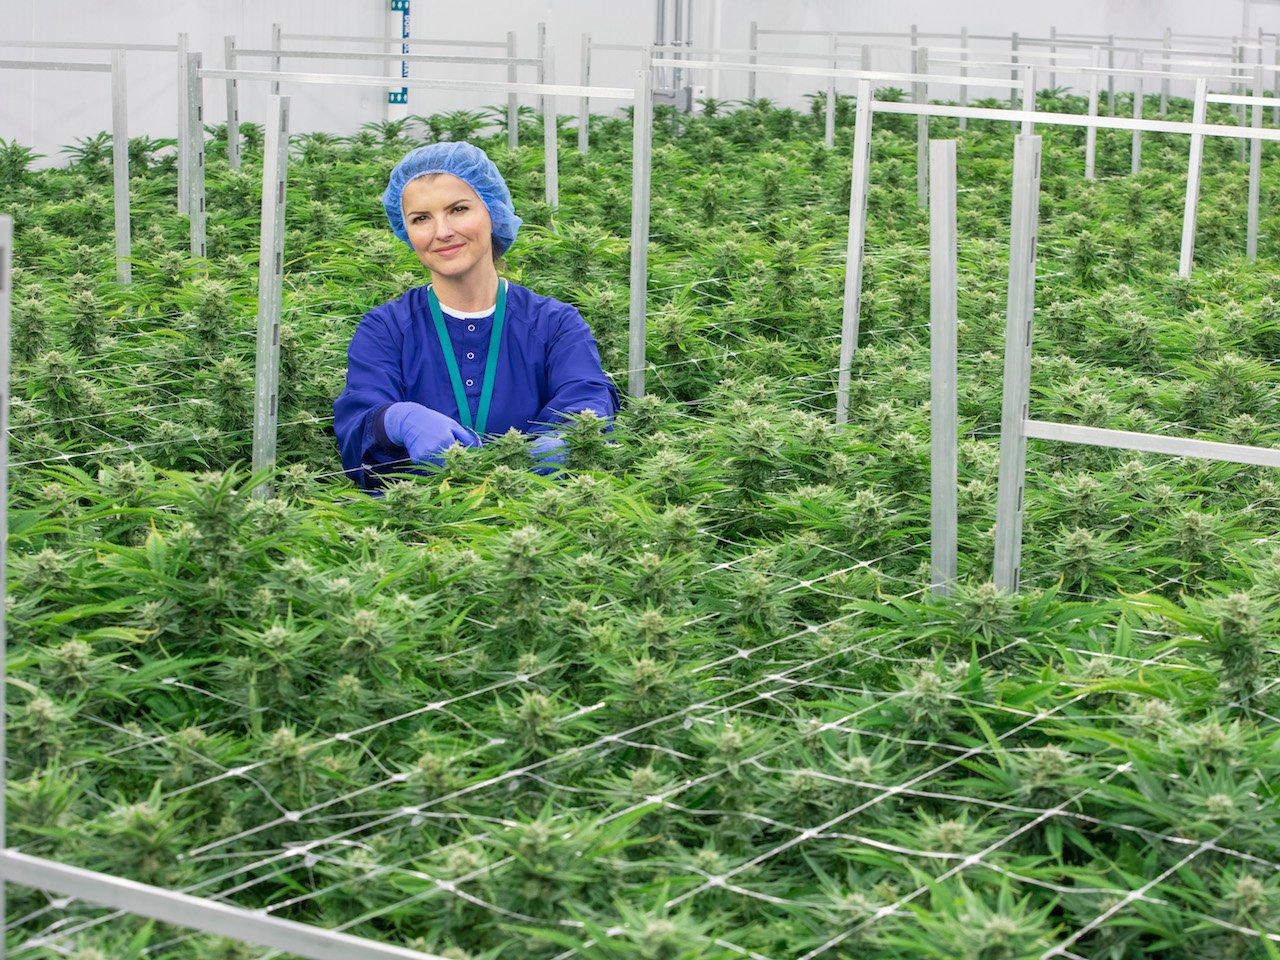 A woman wearing blue scrubs and hair net stands pruning a cannabis plant in a large greenhouse